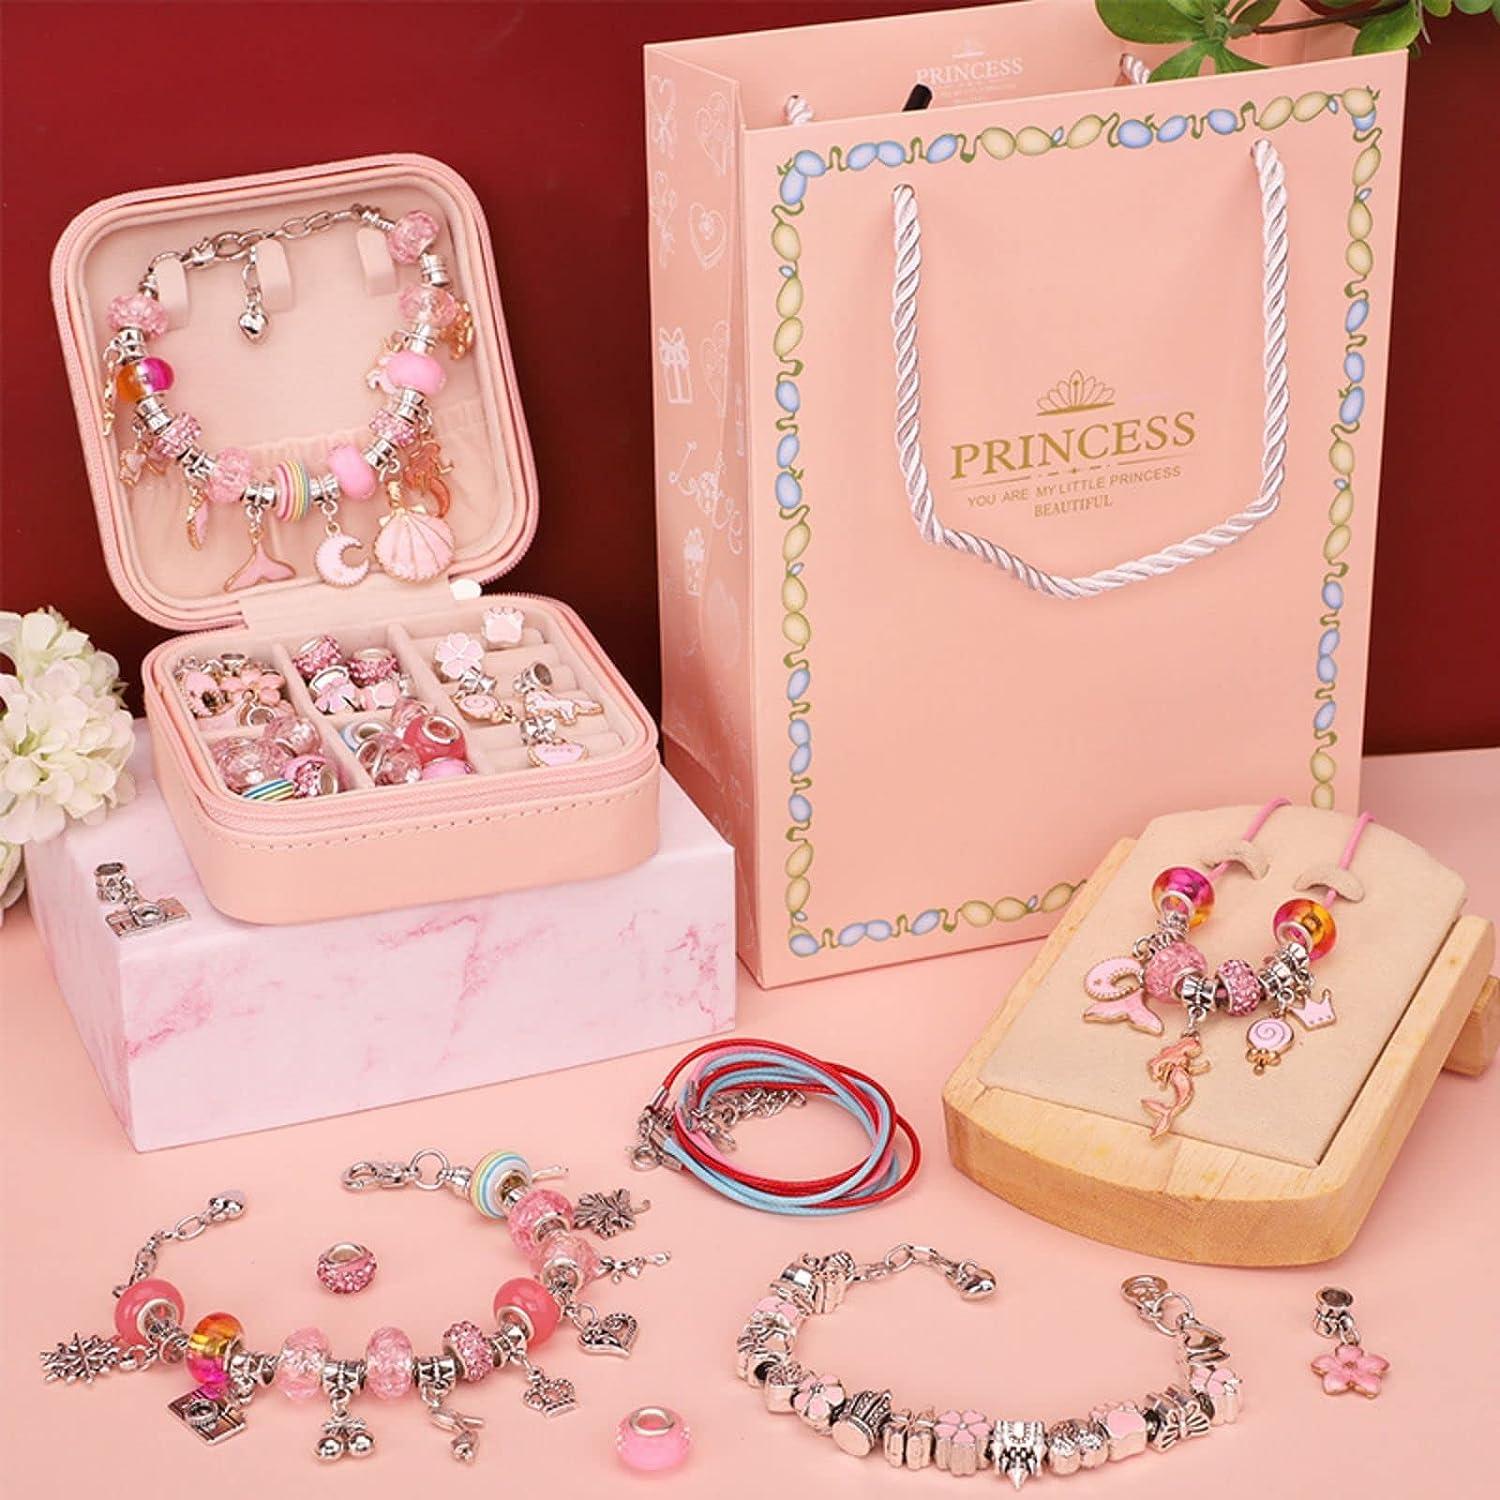 Gaoxyima Charm Bracelet Making kit for Girls Gift Box Contains 66 Pieces of Jewelry  Making kit for 6-12 Years Old Girls' Arts and Crafts for Birthday Christmas  Gifts. Pink